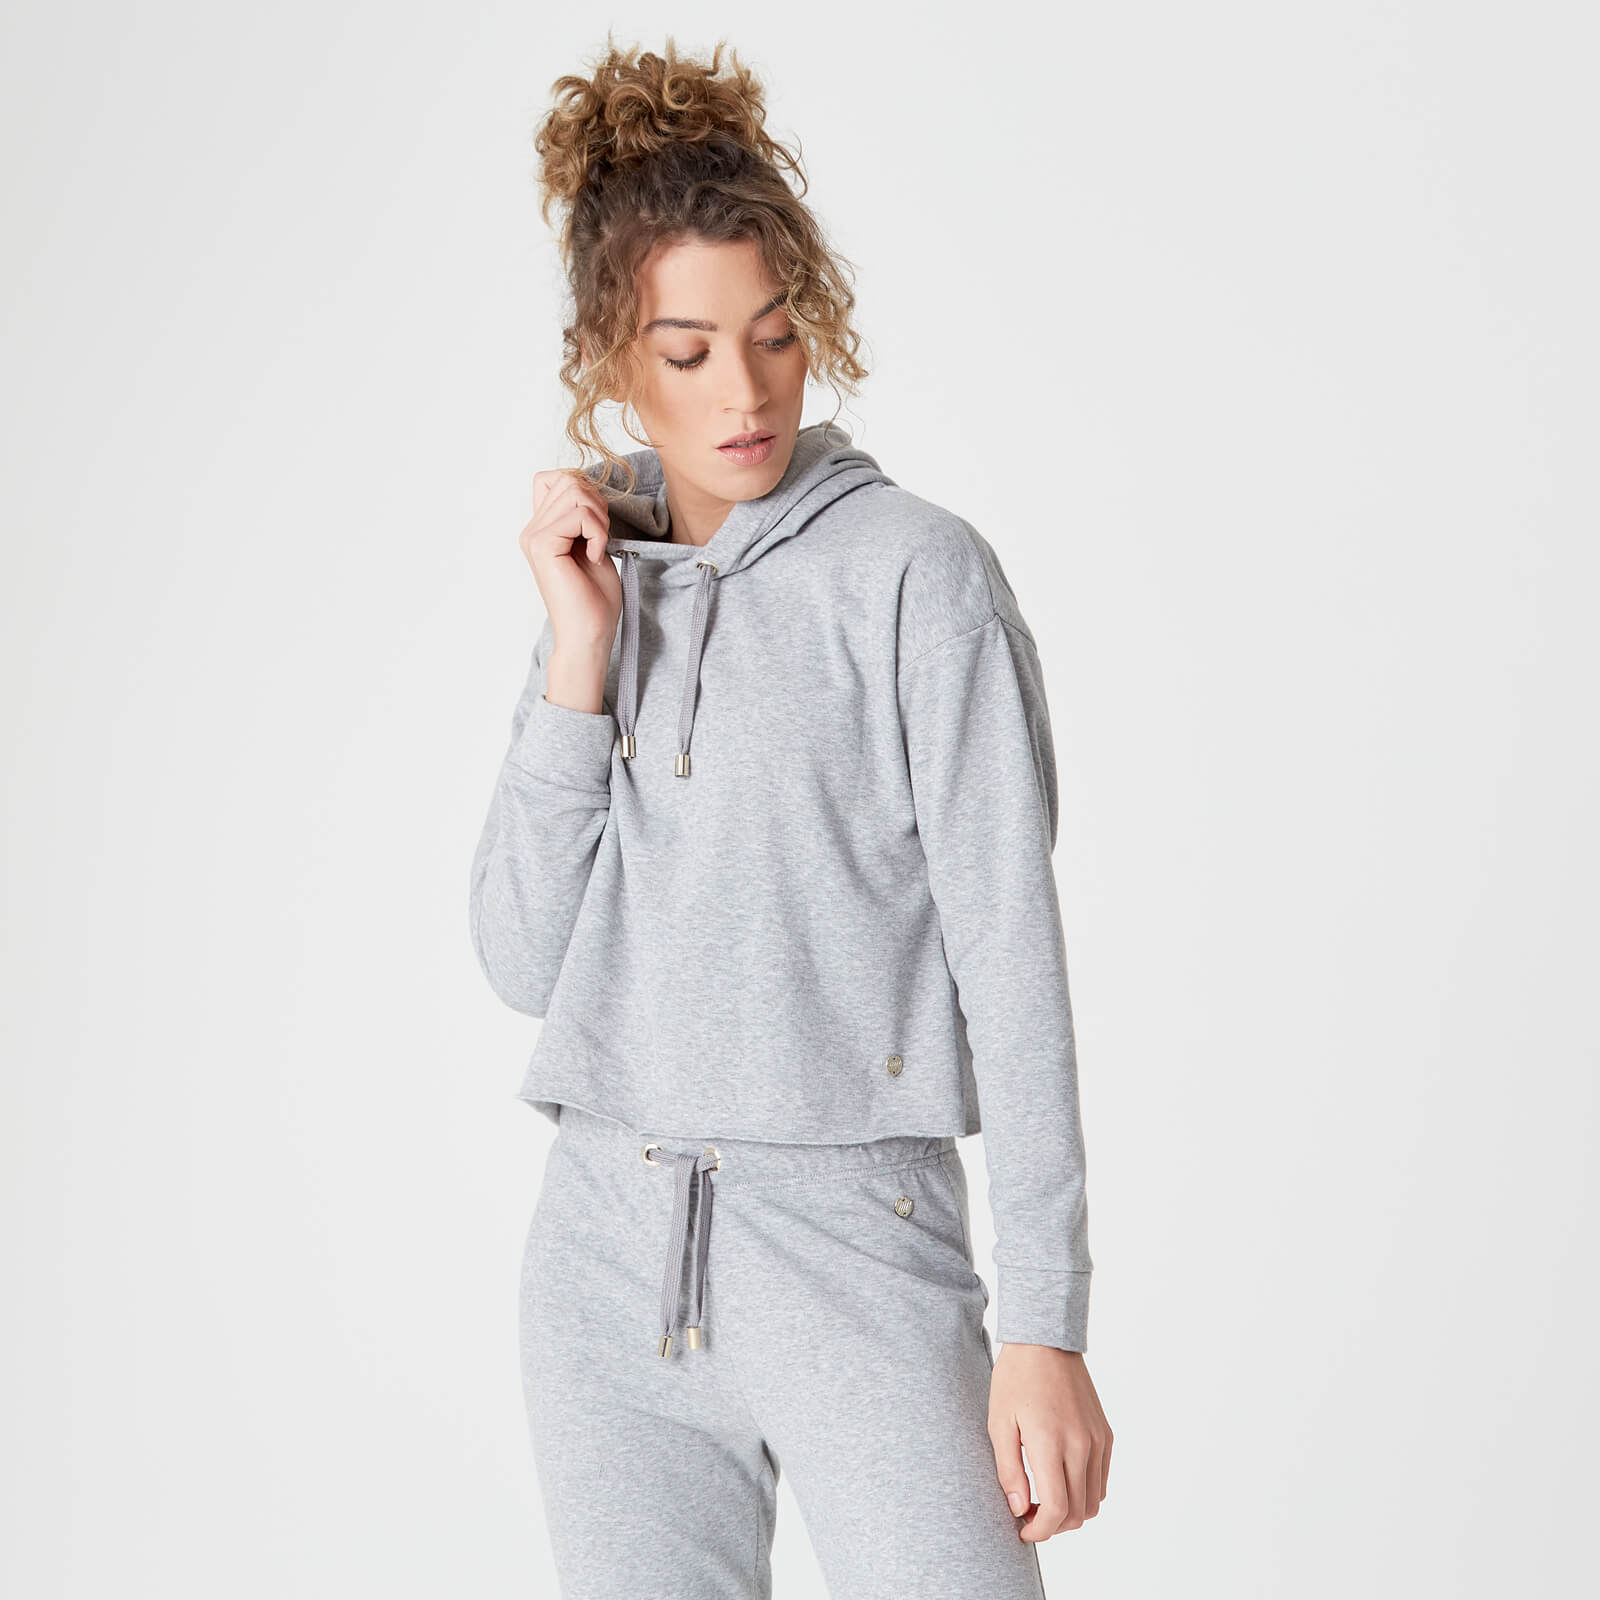 Myprotein Luxe Lounge Hoodie - Grey Marl - XS